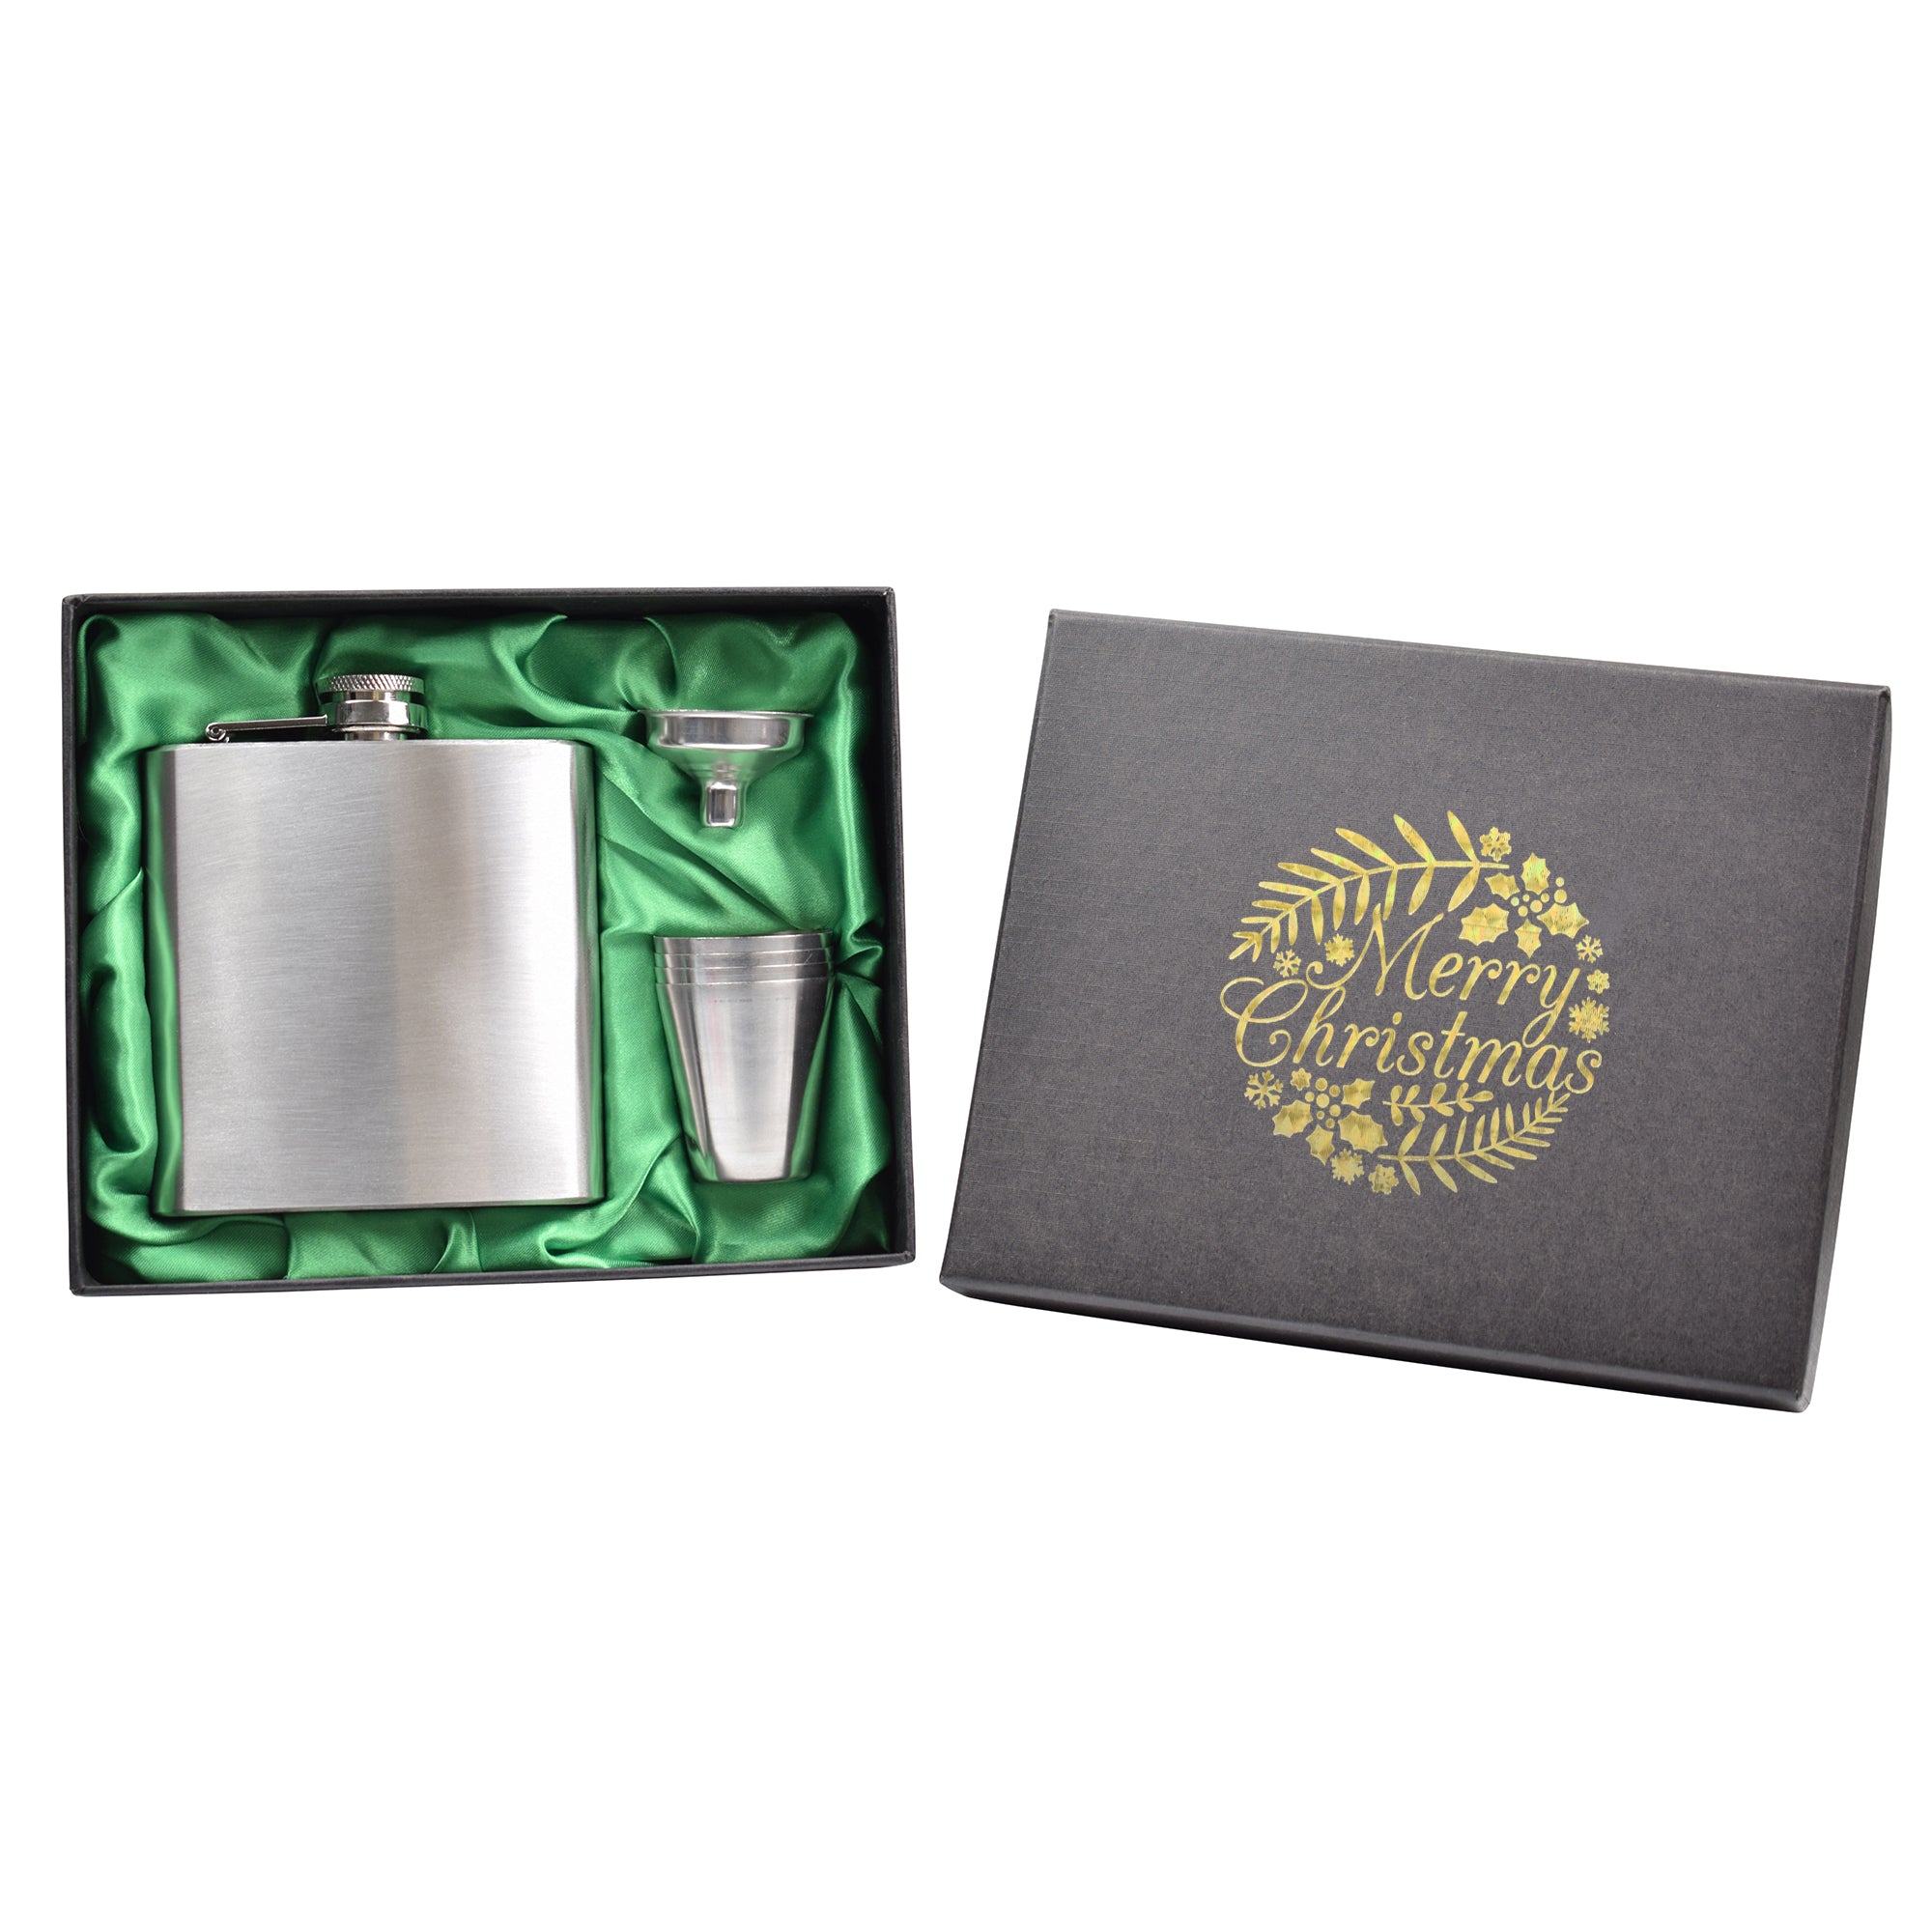 Merry Christmas 6oz Hip Flask in Gift Box with Funnel and Cups